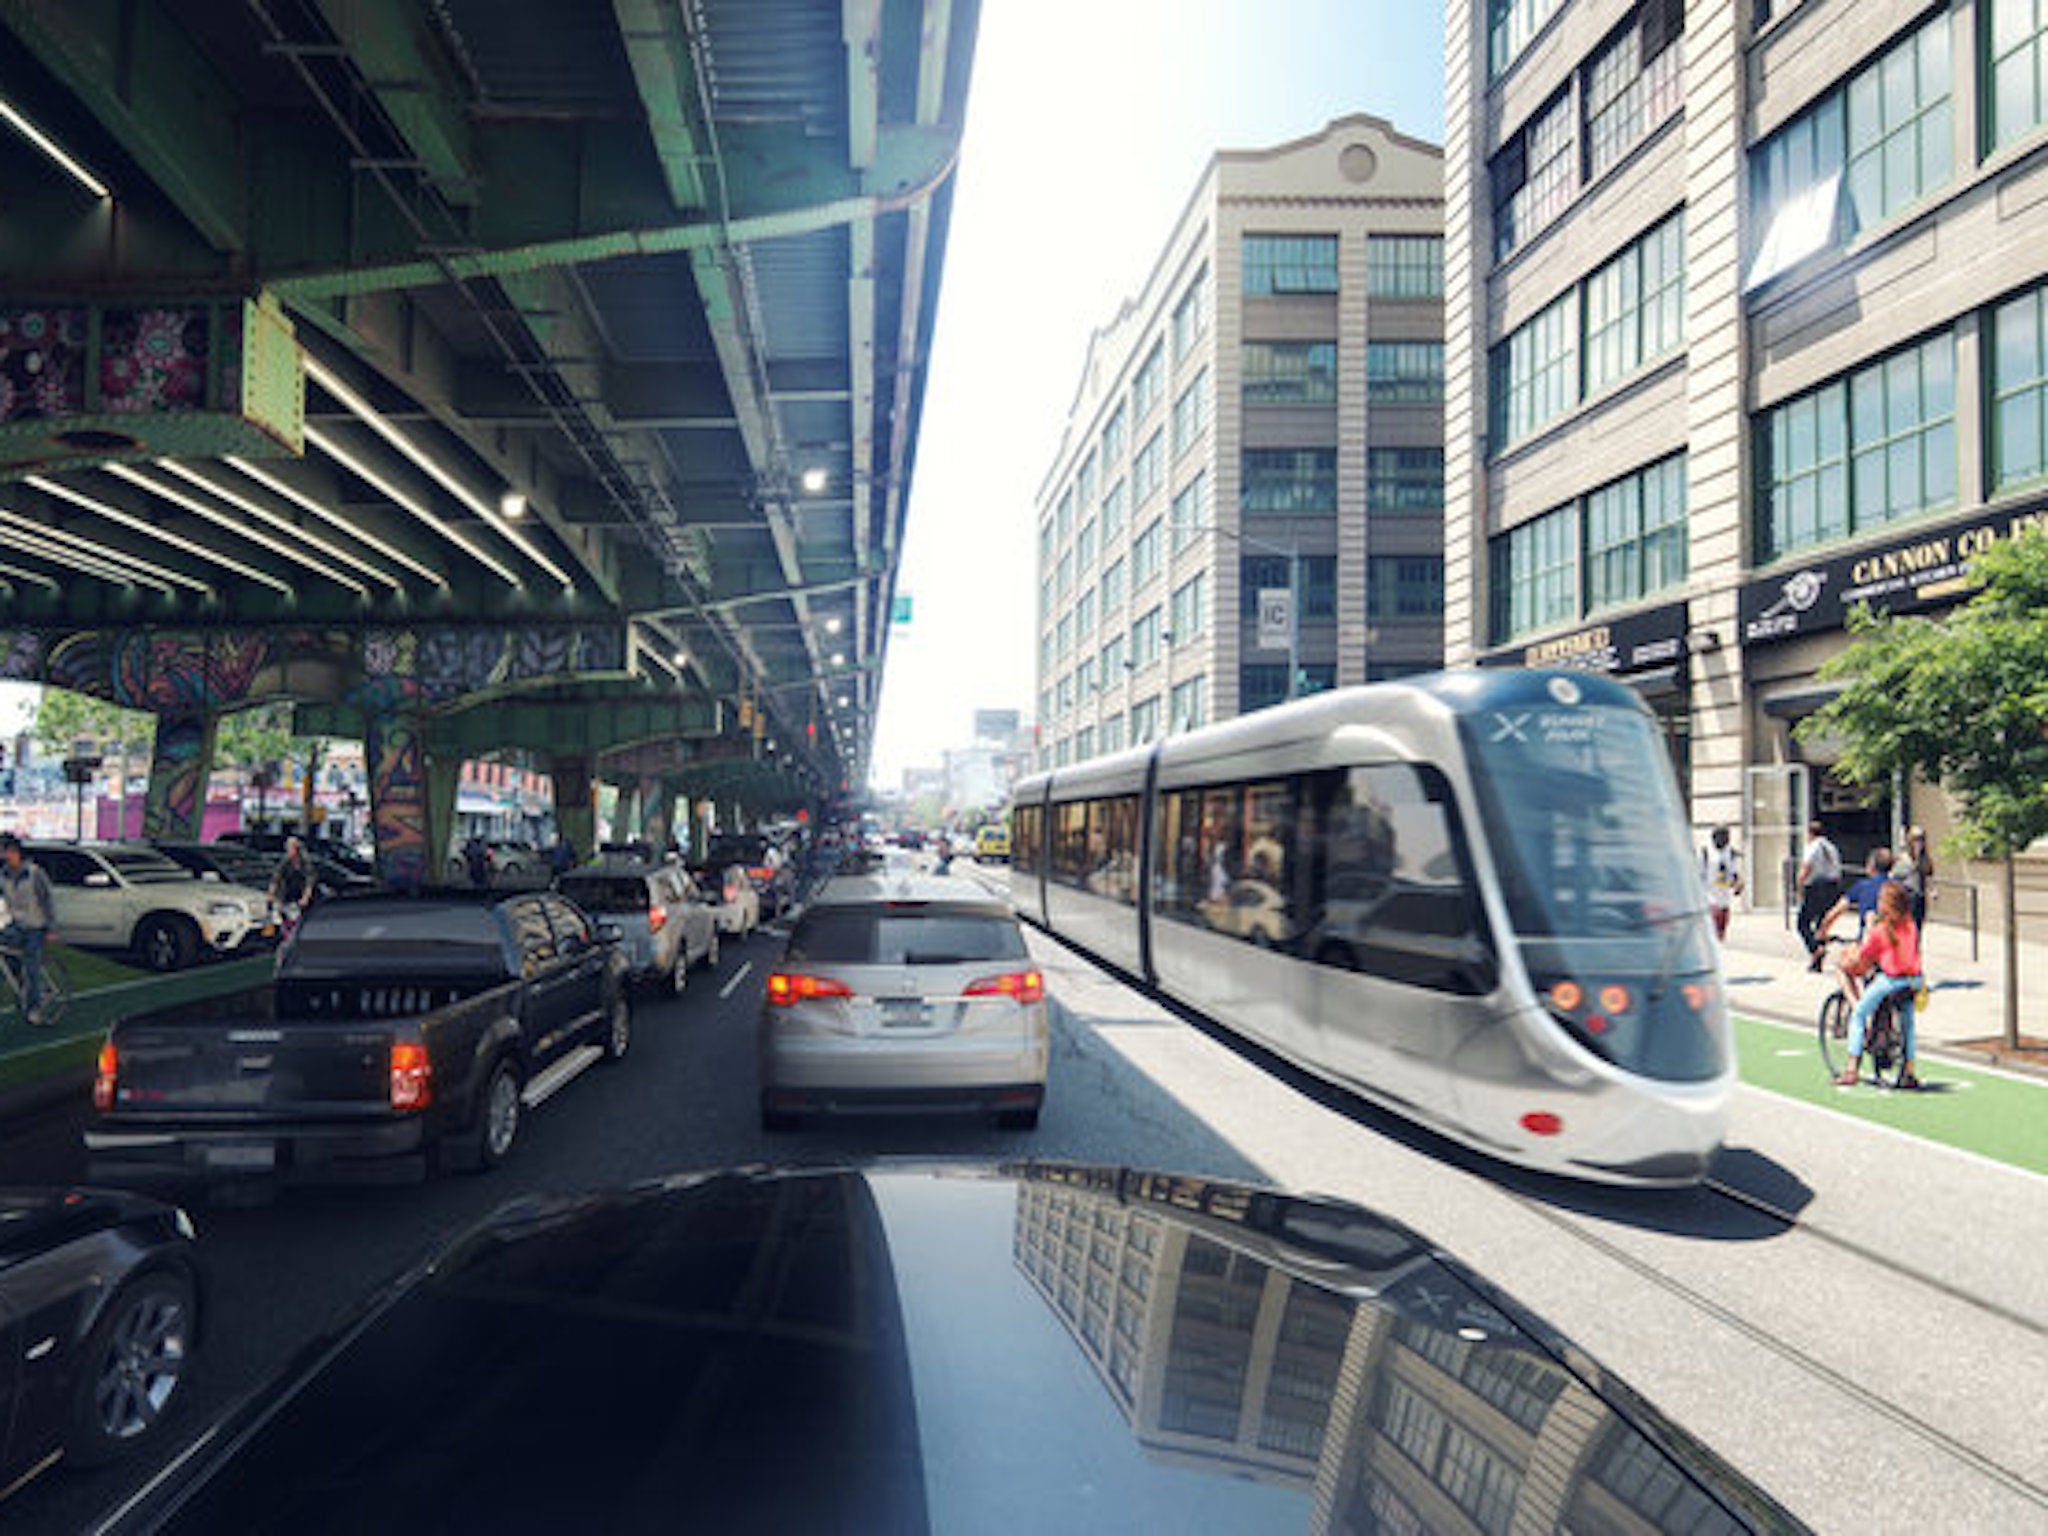 A rendering shows the proposed streetcar rolling through Brooklyn. Courtesy of Friends of the the Brooklyn Queens Connector.